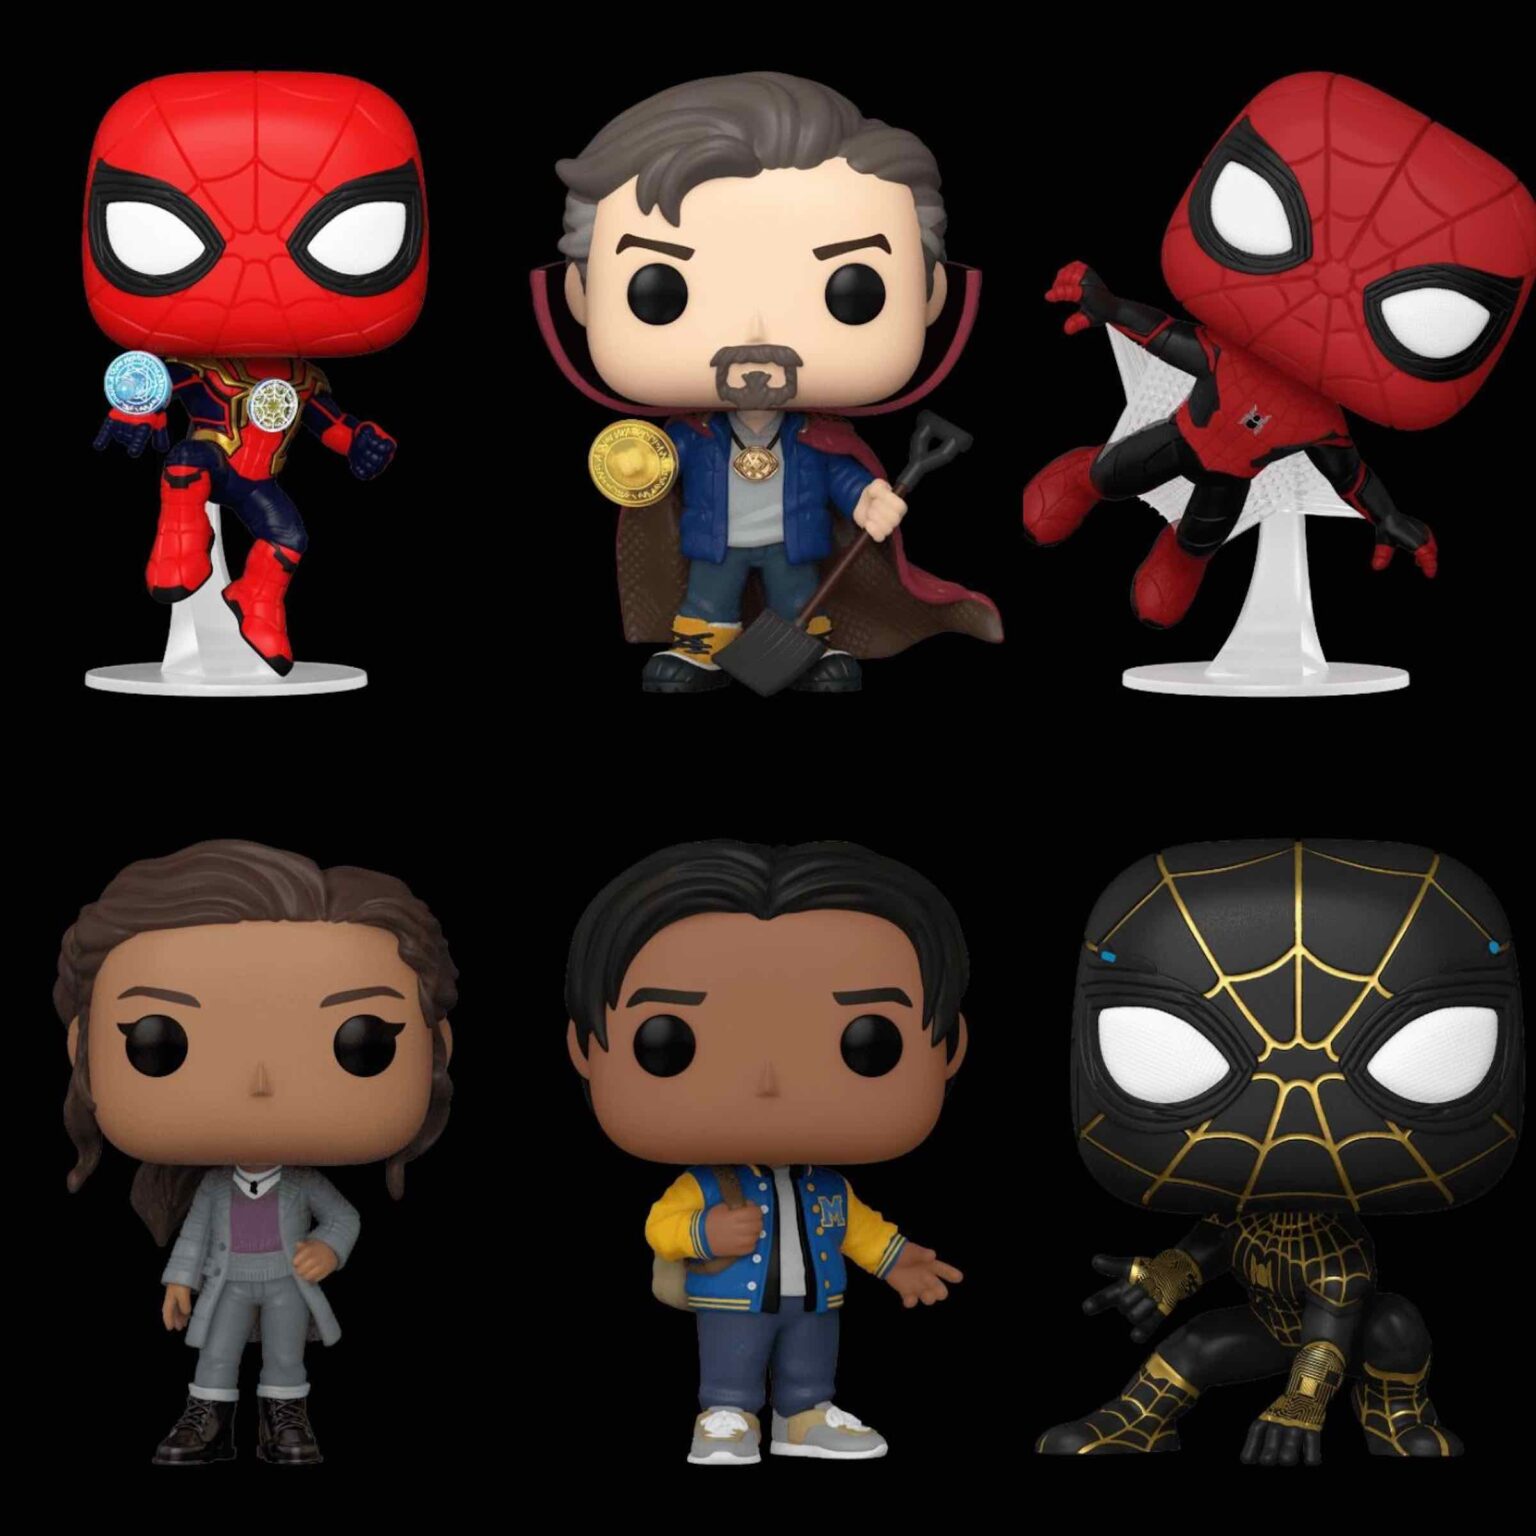 The best information always seems to come from the oddest places. Get your Funkos out of the box and dive into these spoilers for Tom Holland's Spider-Man.